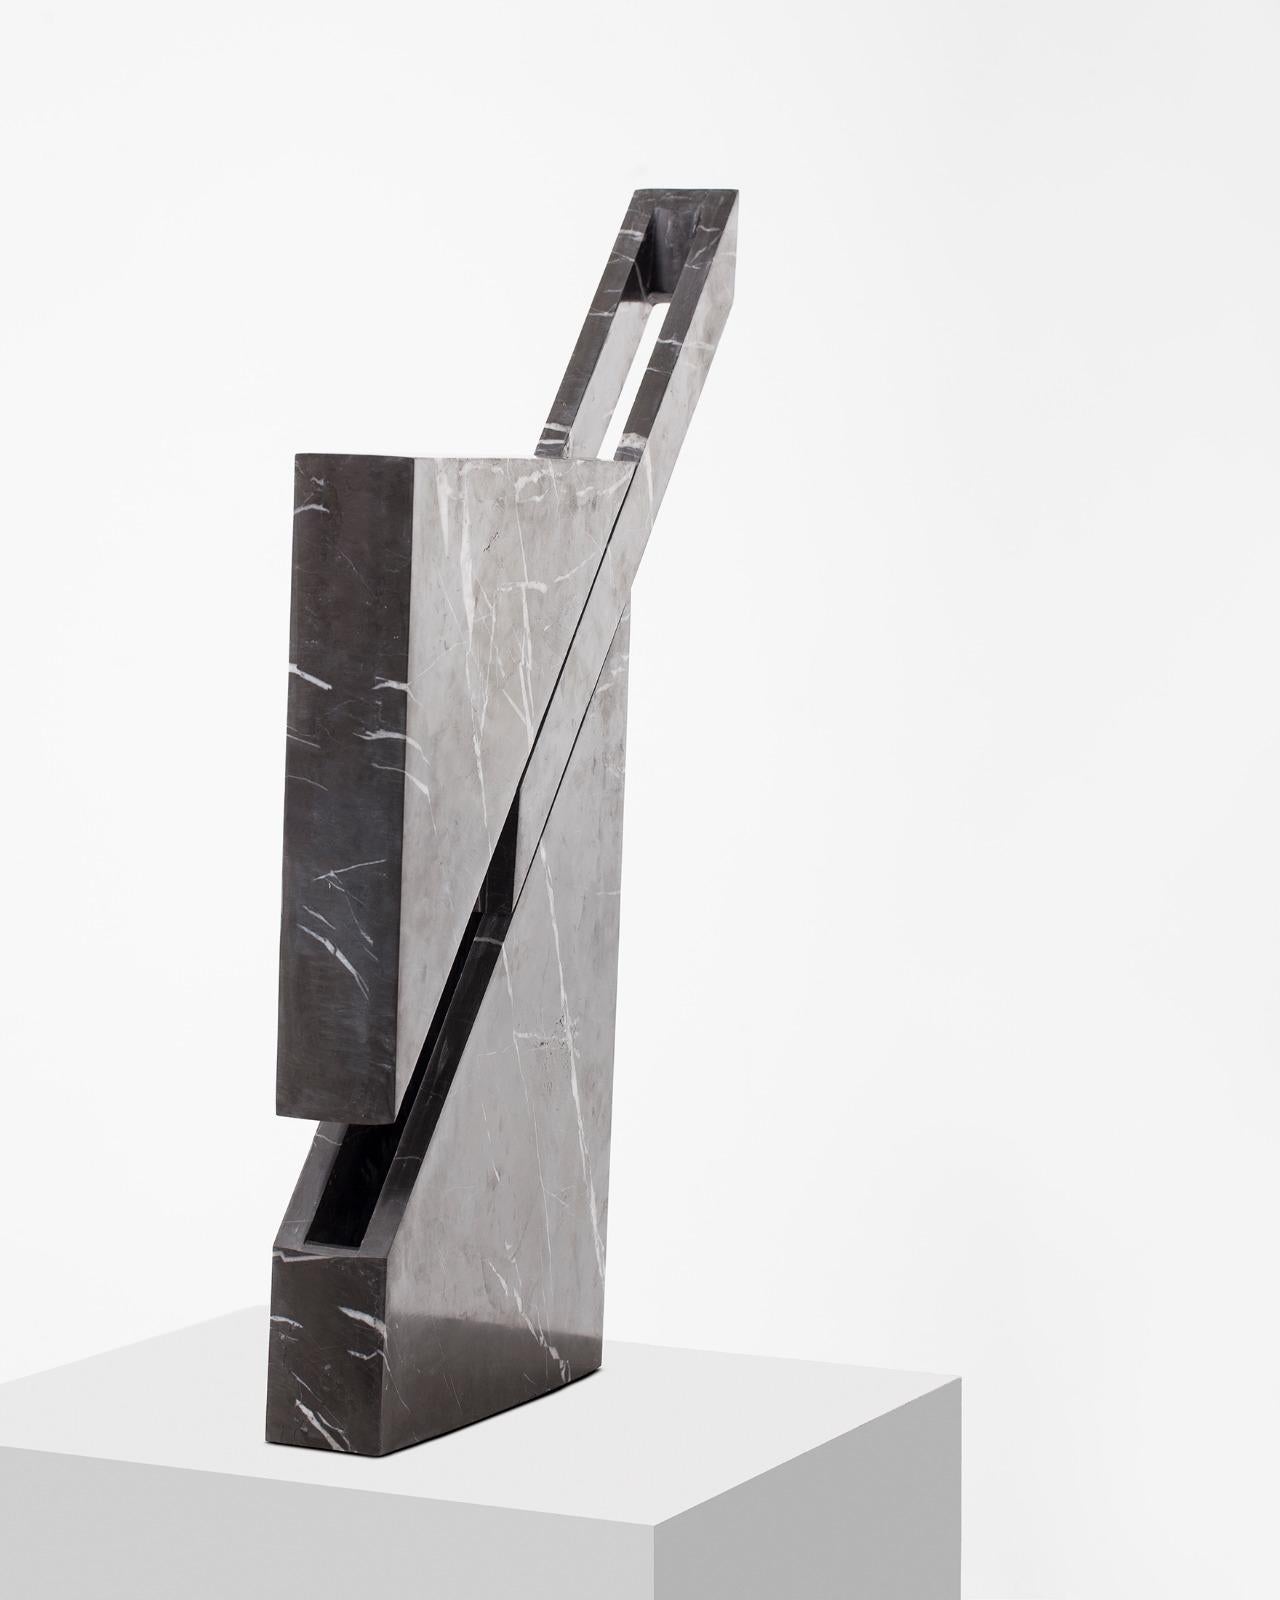 Doric marble table lamp by Carlos Aucejo
Dimensions: 57 x 39 x 7 cm 
Materials: Pietra grey marble

Iceberg
It is a functional sculpture made with Pietra Grey (Iranian marble). The piece is presented in its primitive morphology. It is a compact